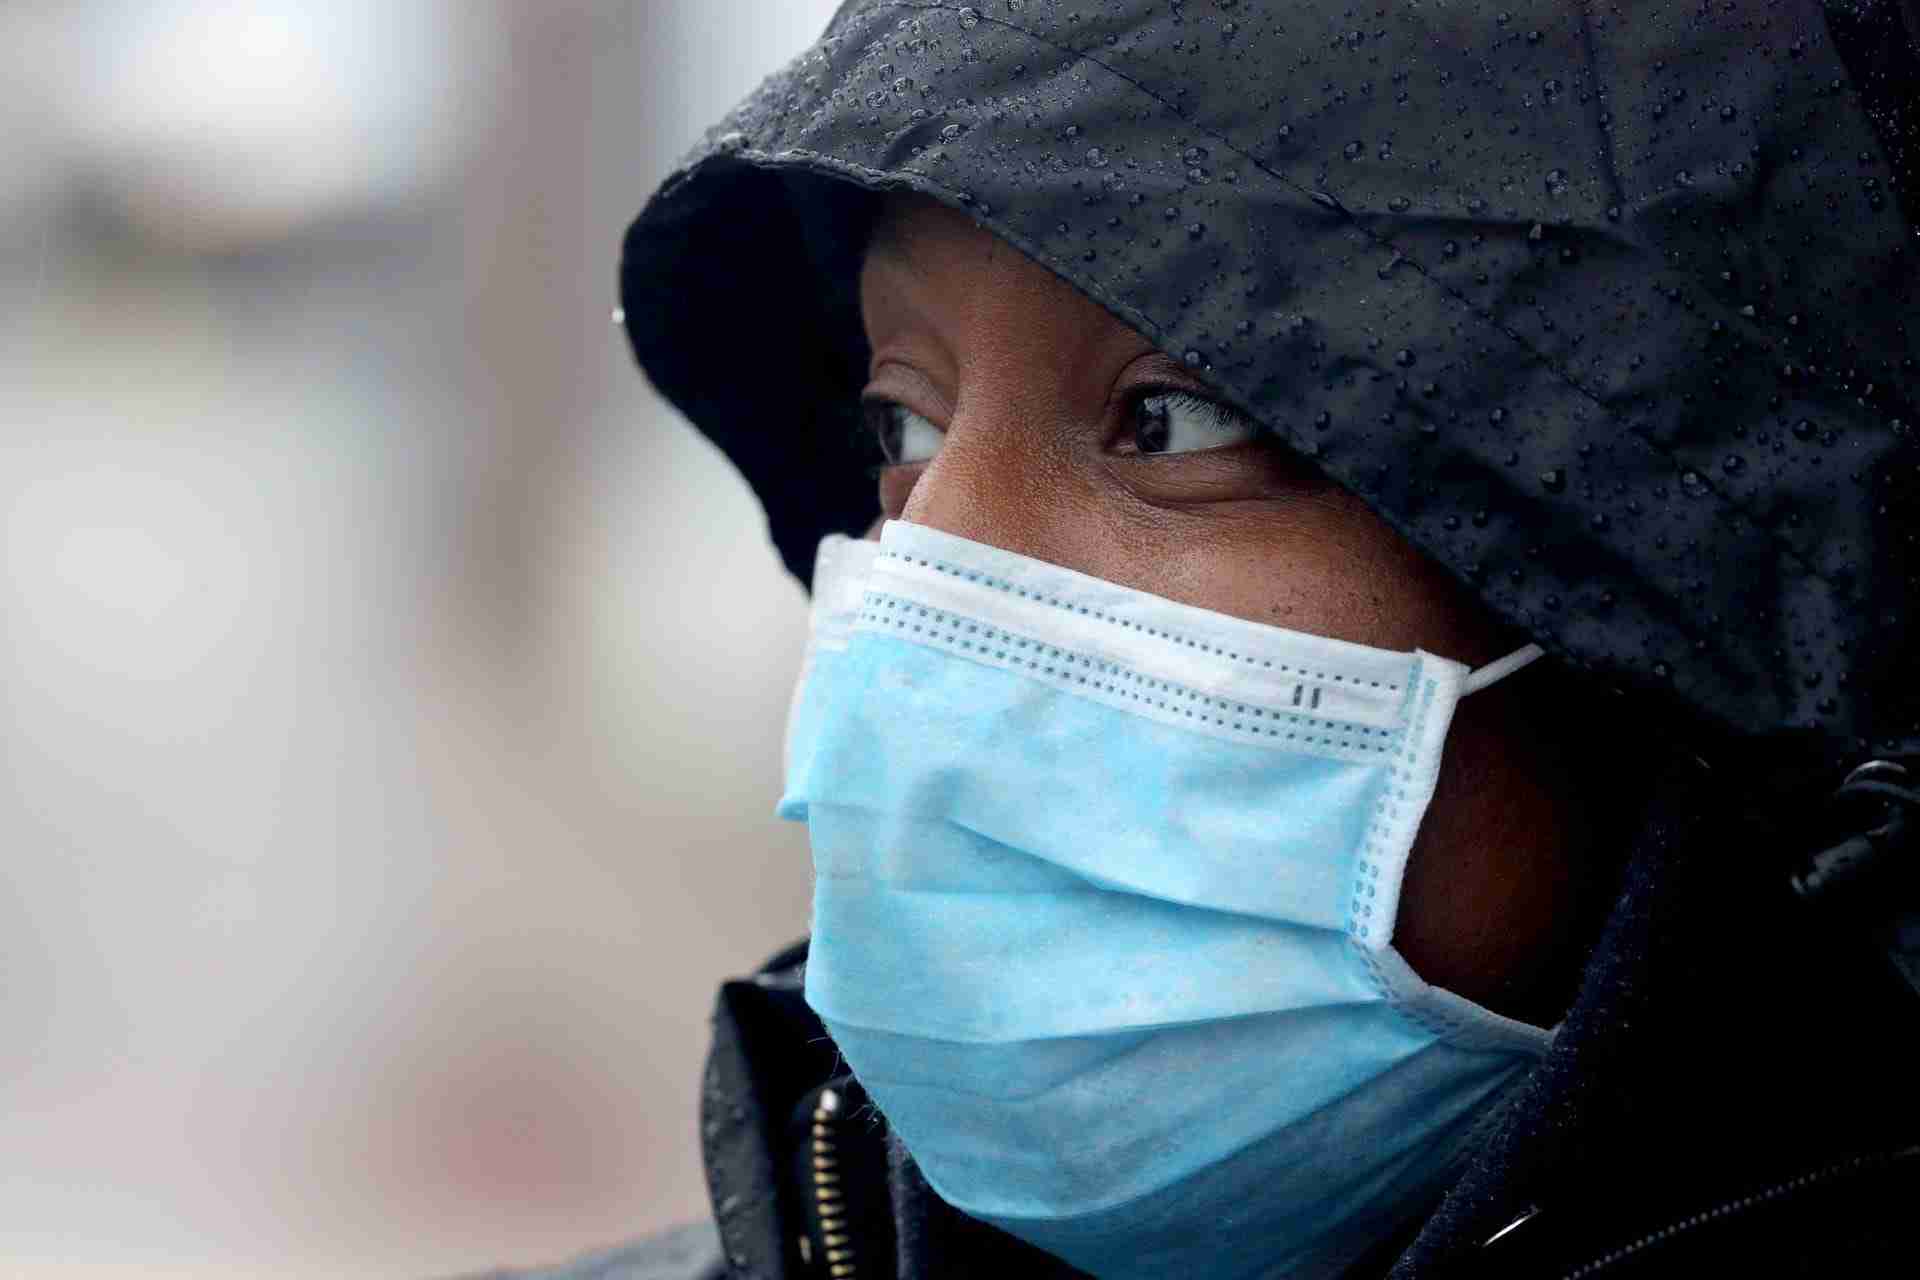 Mail carrier Jasmine Armstrong wears a mask while delivering the mail in Peekskill, N.Y. March 23, 2020. Armstrong says the the postal service supplies gloves and a mask, and she is maintaining the recommended six feet from others in order to avoid being exposed to the Covid-19 virus.